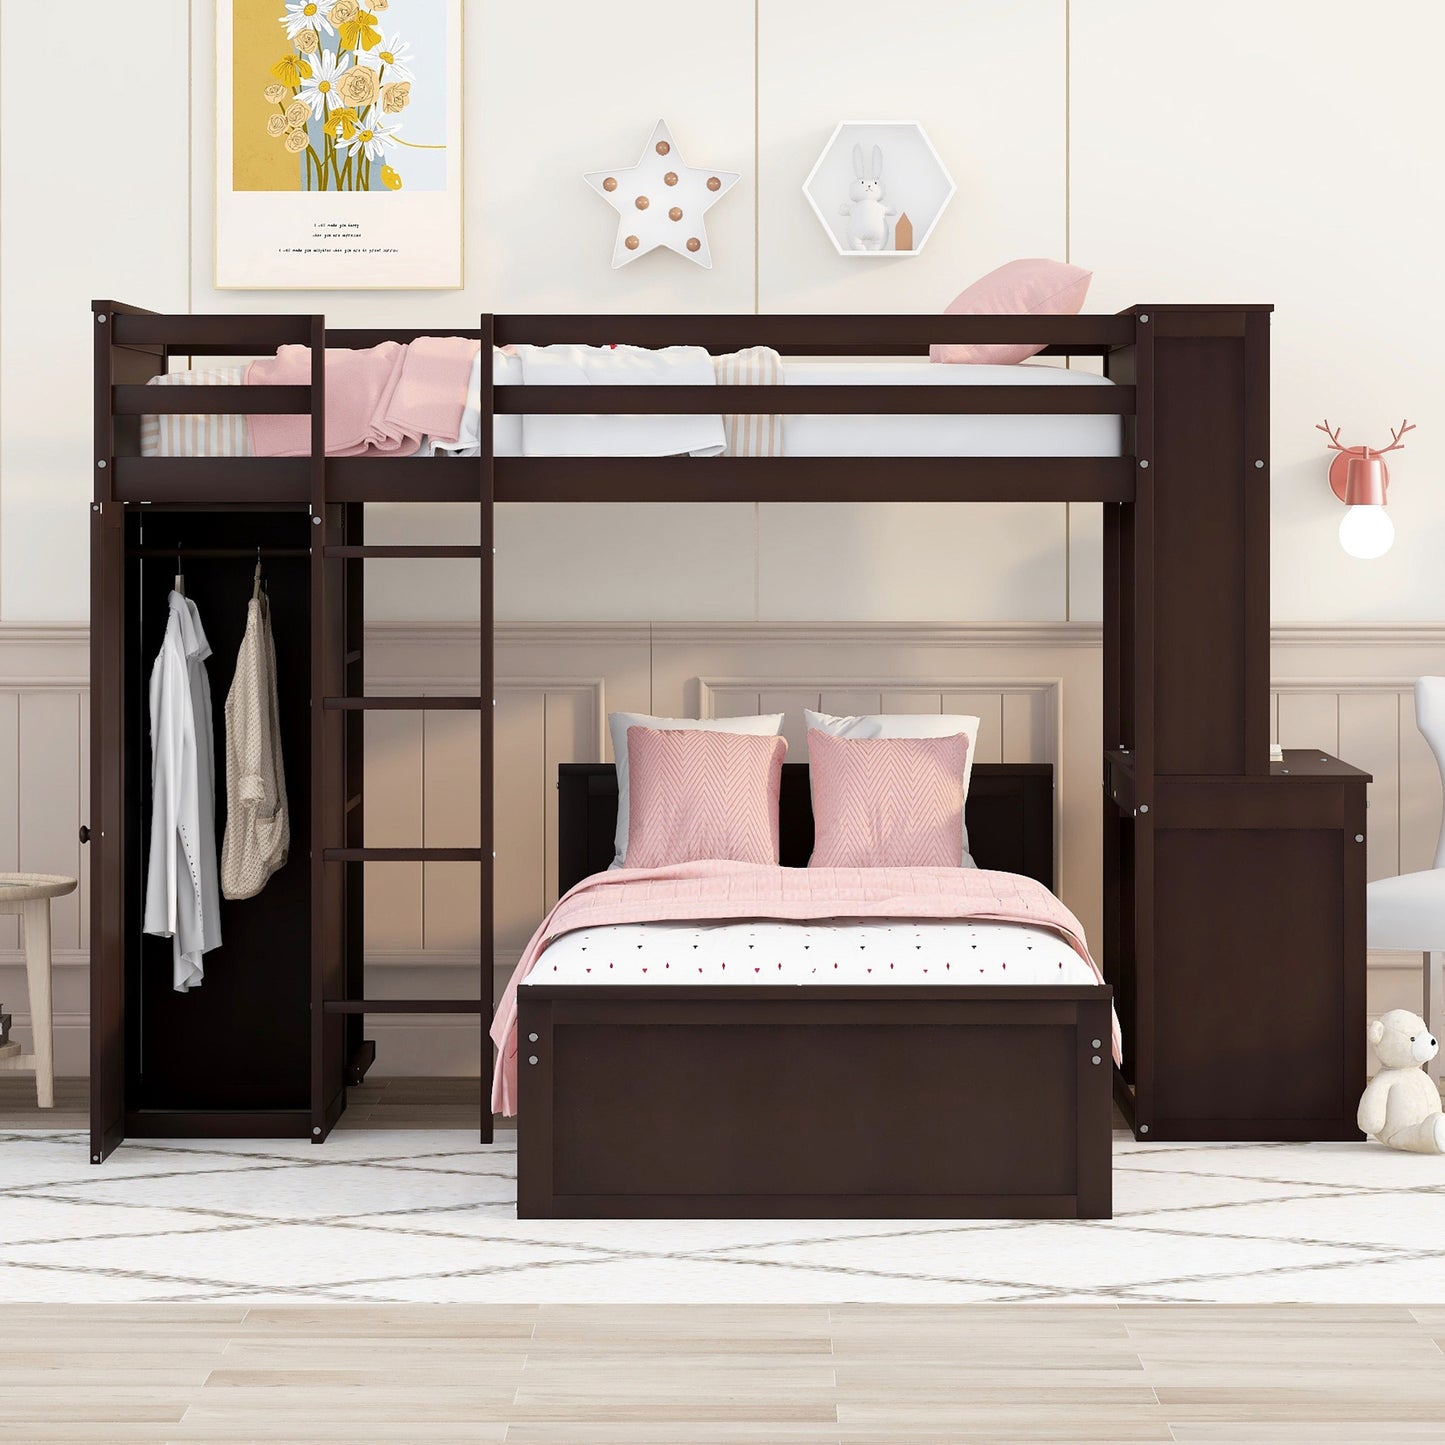 Twin size Loft Bed with a Stand-alone bed, Shelves,Desk,and Wardrobe-Espresso